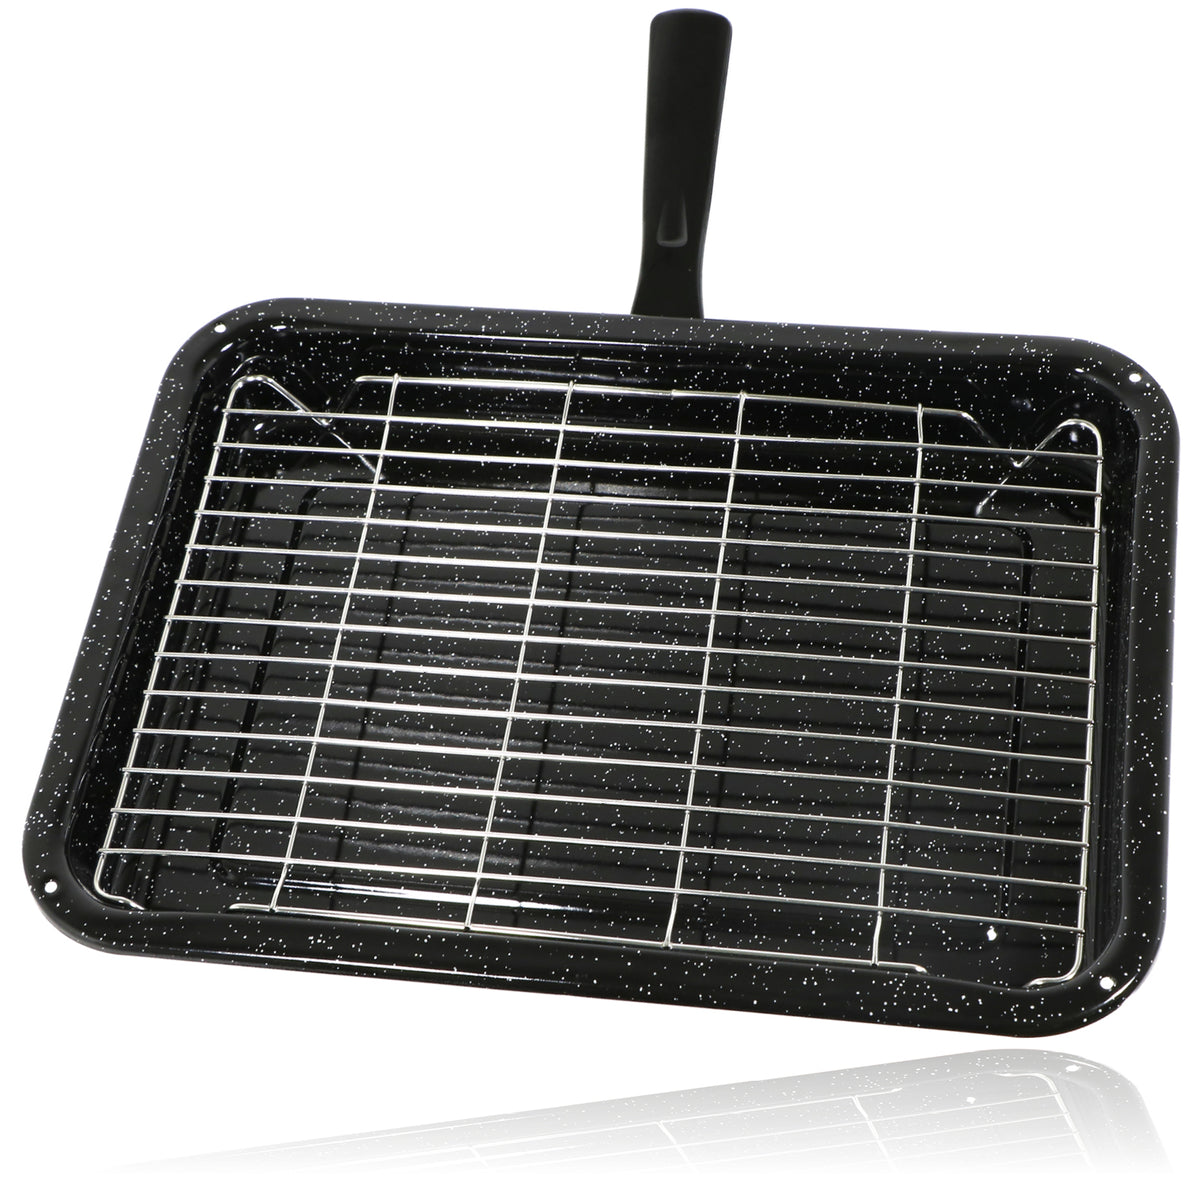 Small Square Enamelled Grill Pan Tray Rack & Handle for Bush Oven Cooker 